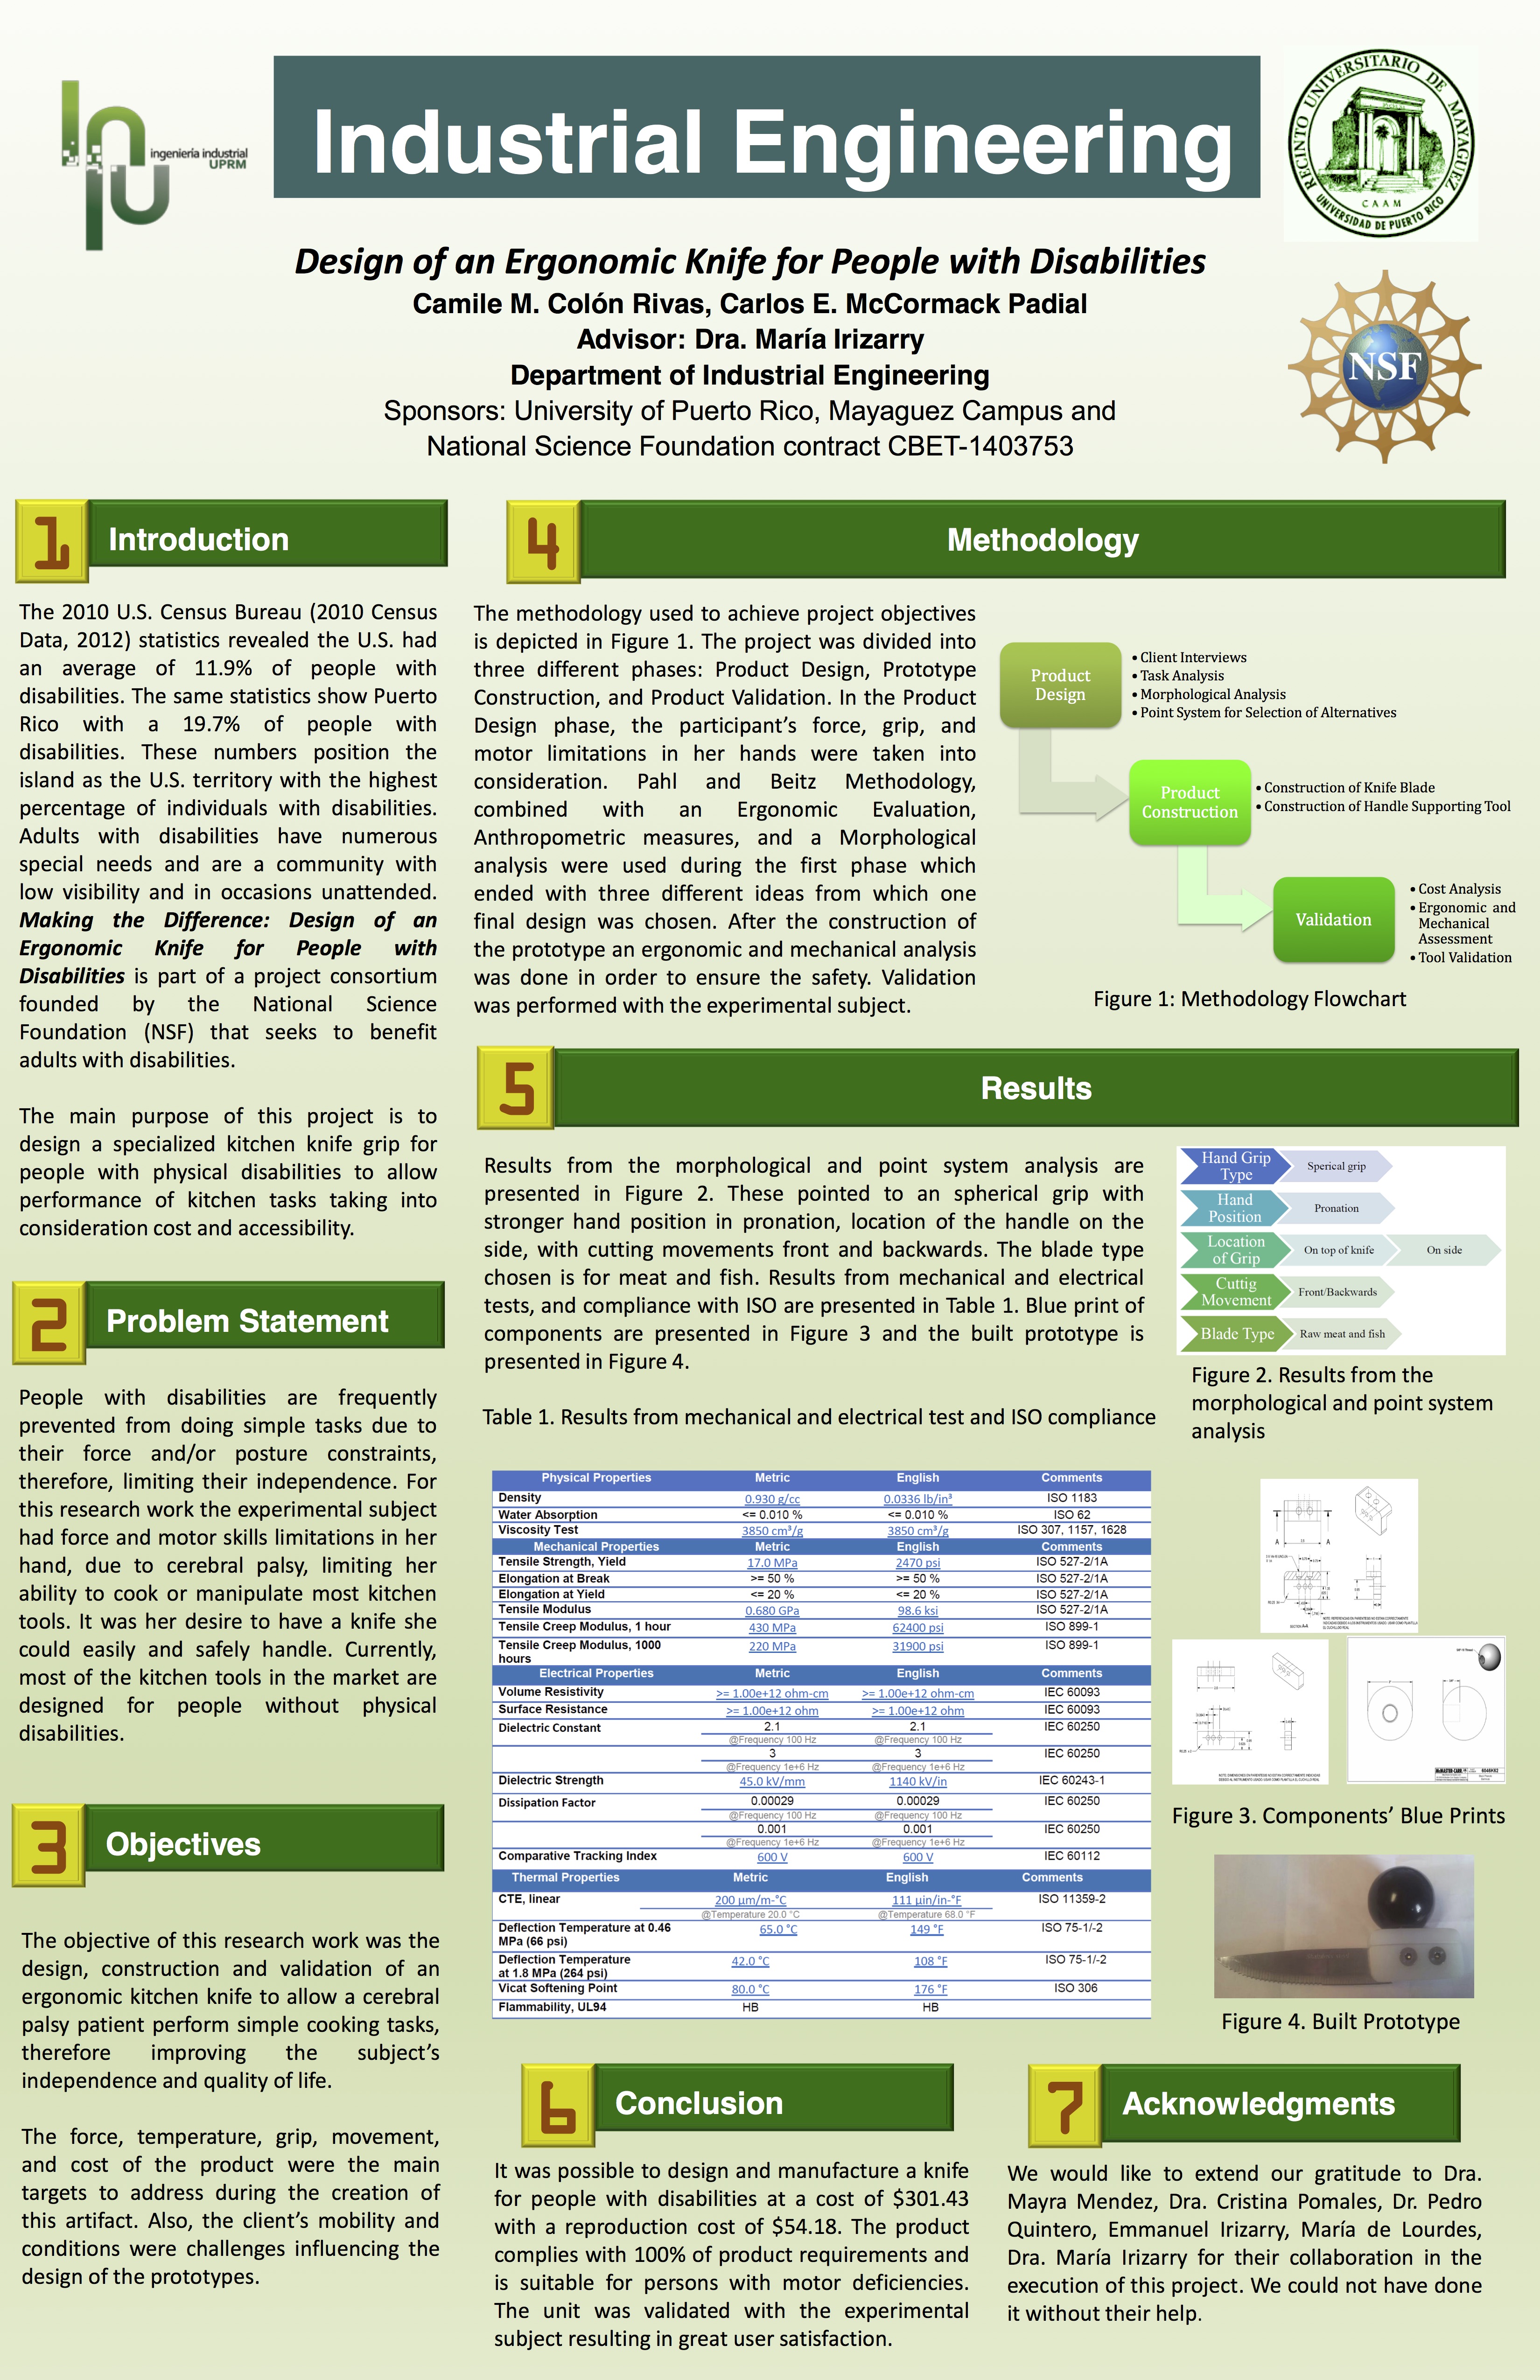 Design of an Ergonomic Knife for People with Disabilities (poster)